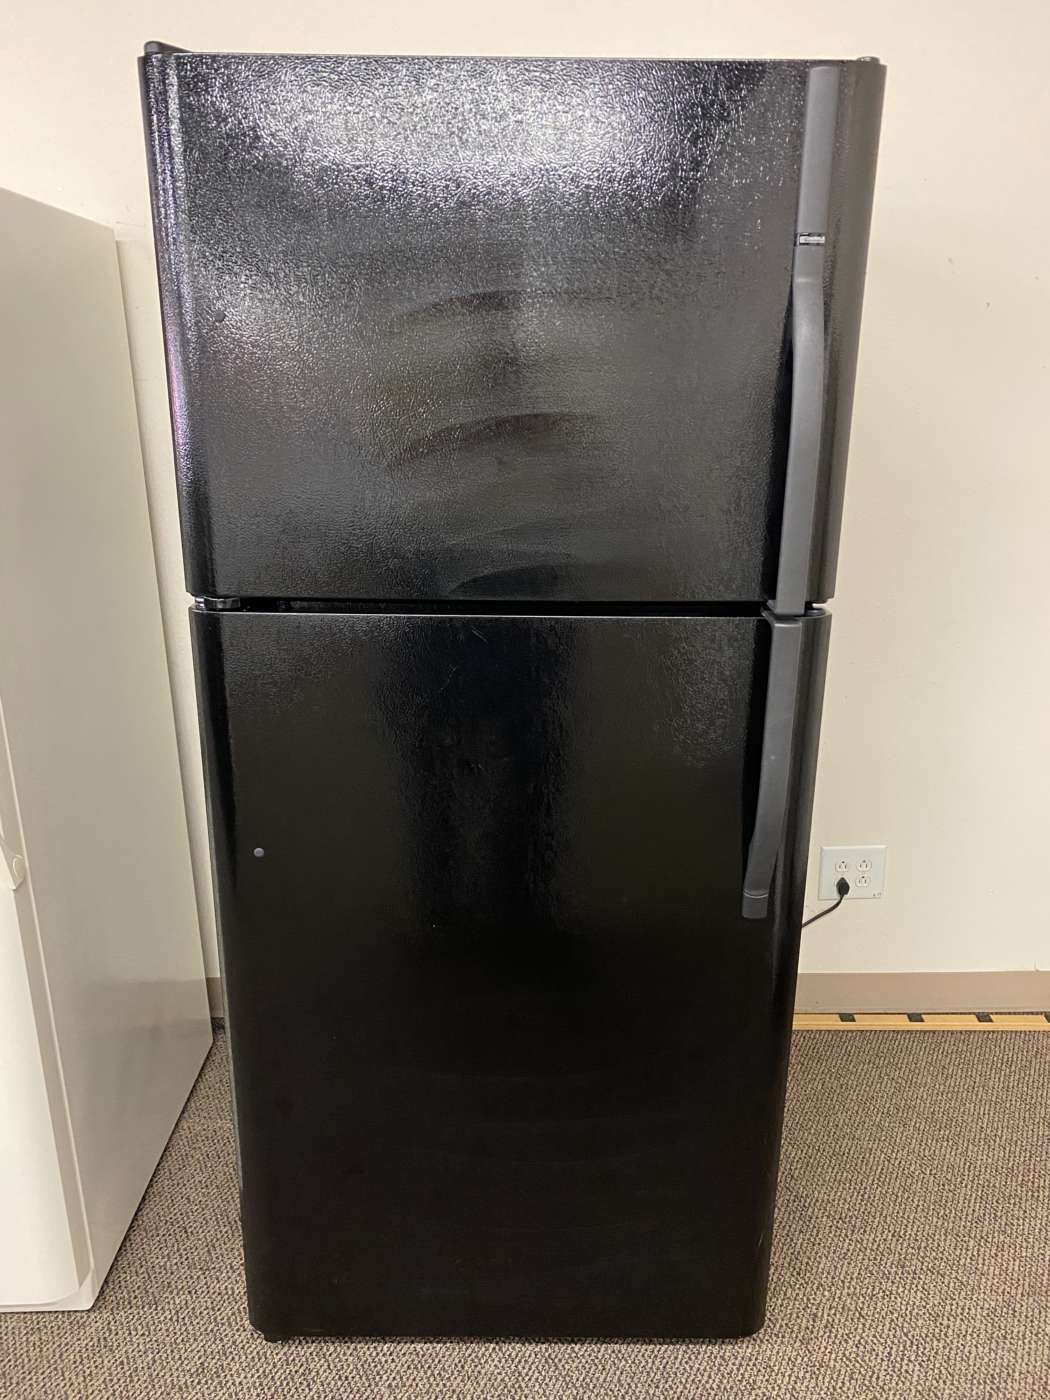 Reconditioned KENMORE 21 Cu. Ft. Top-Freezer Refrigerator With IceMaker – Black